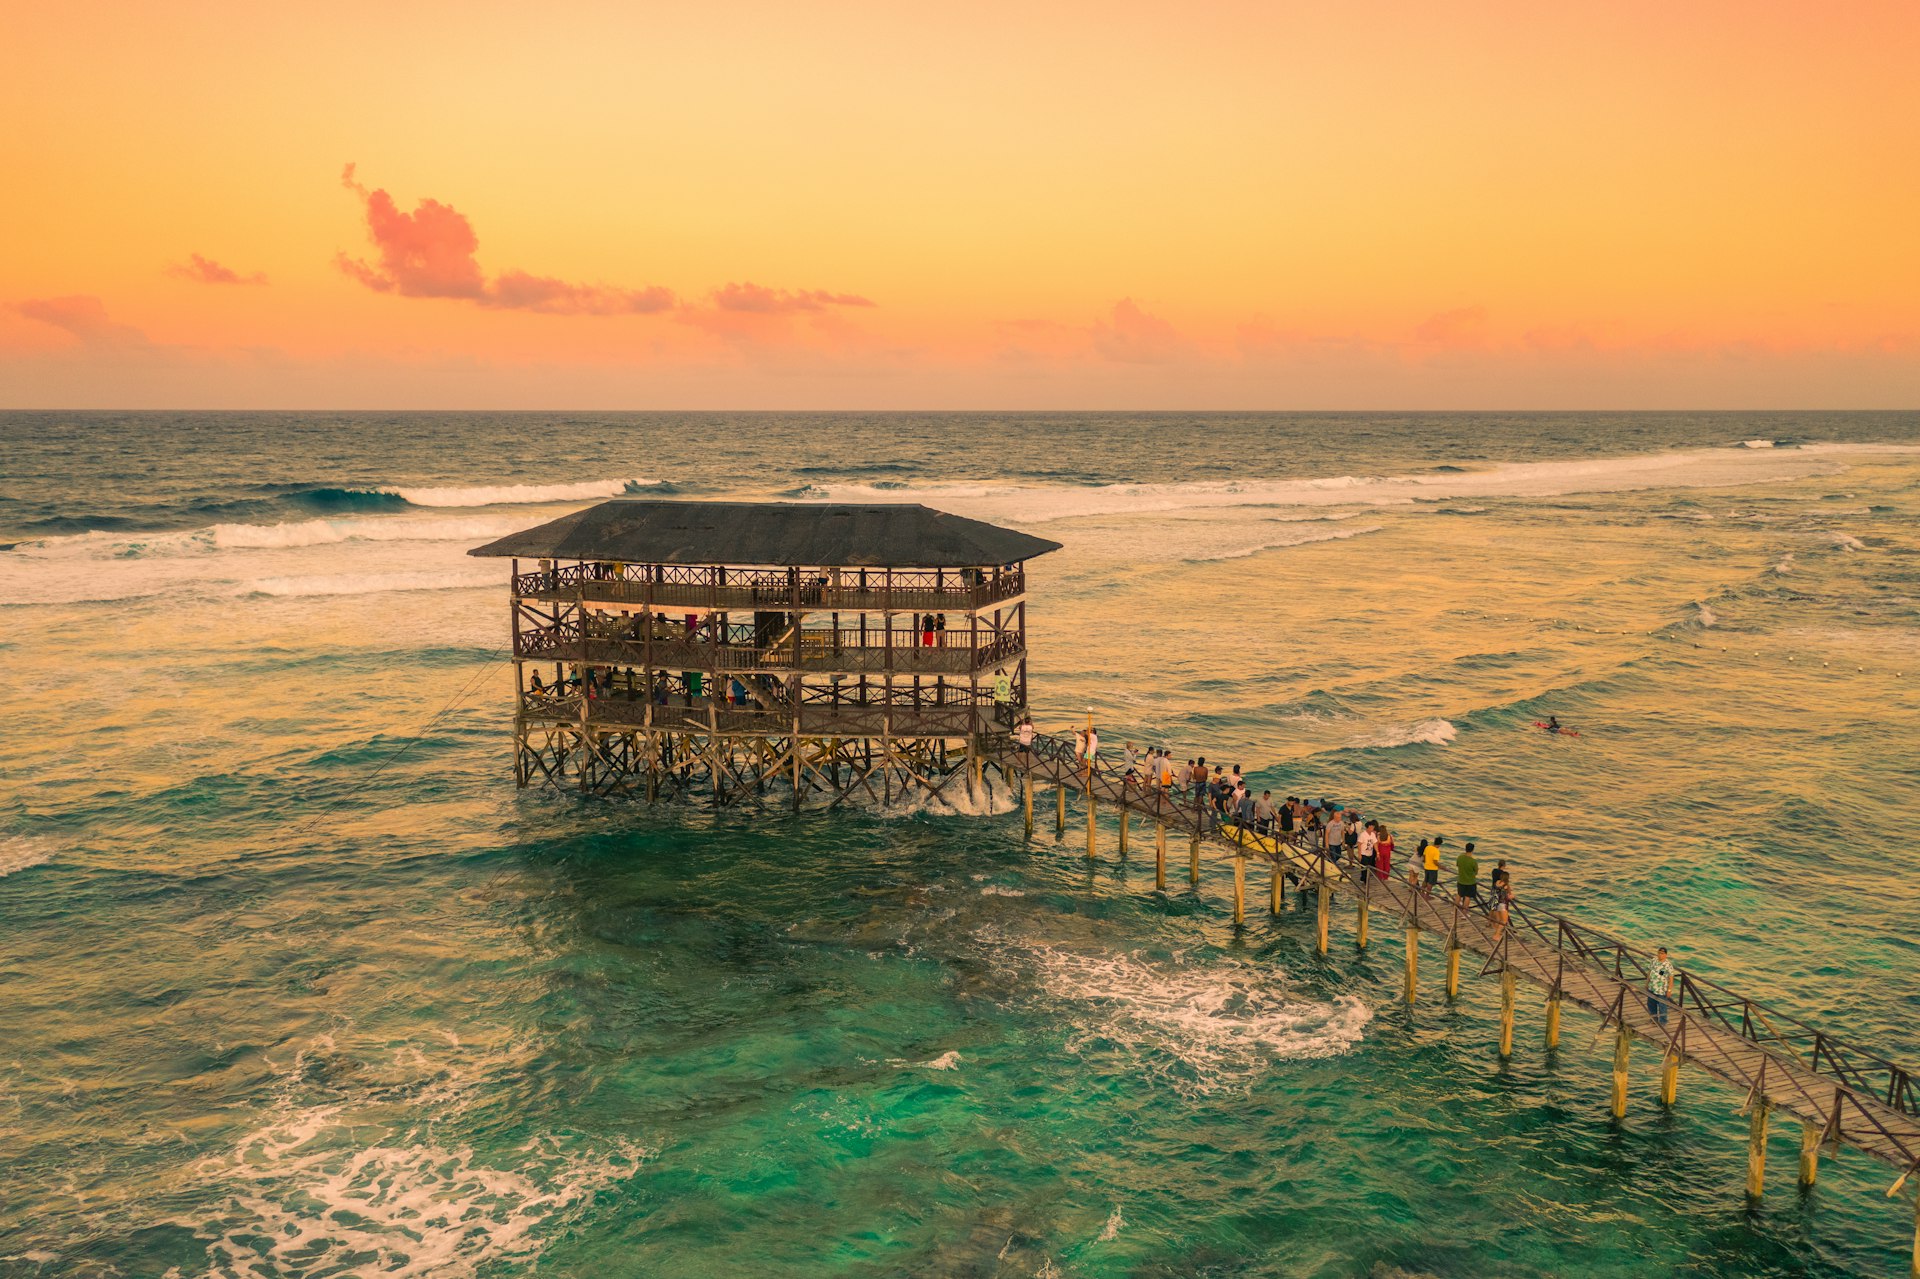 A large multi-level wooden structure and walkway our to sea near a surf spot